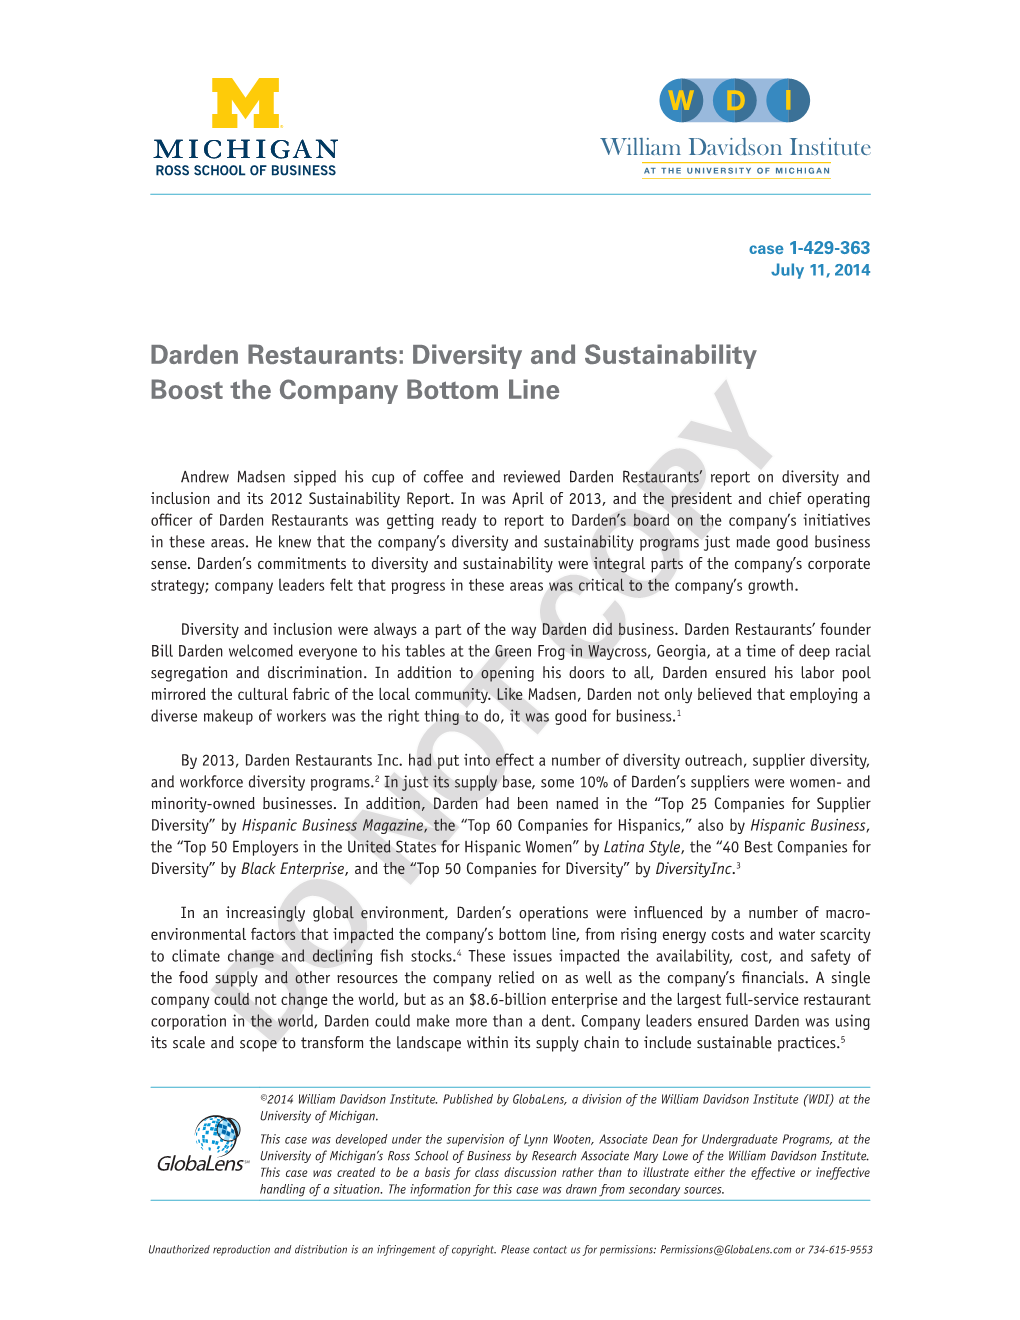 Darden Restaurants: Diversity and Sustainability Boost the Company Bottom Line